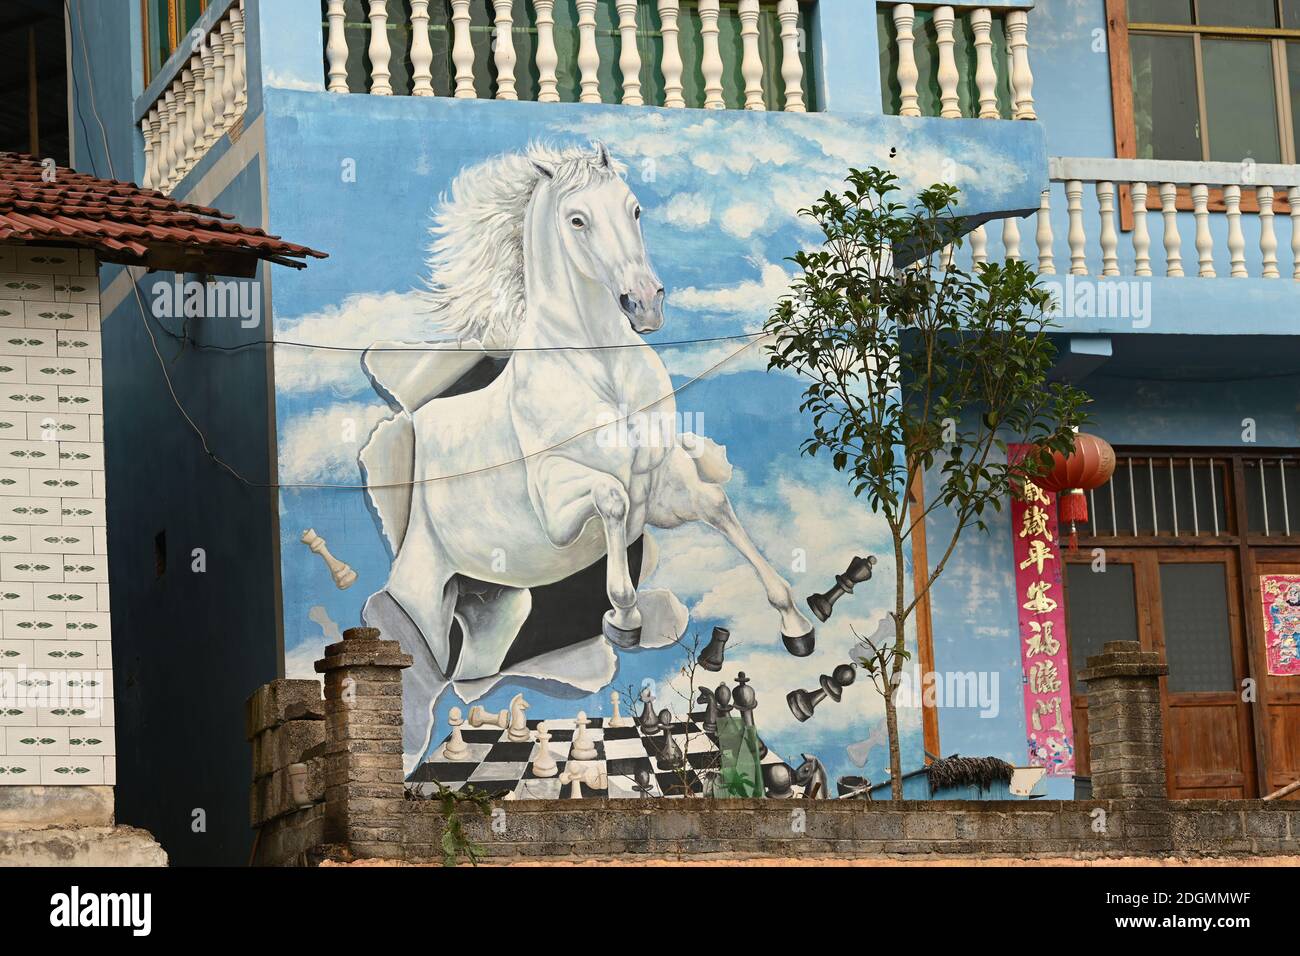 The walls of houses in a village are painted with colorful graffiti, combining traditional villages with modern art in Tongren city, southwest China's Stock Photo